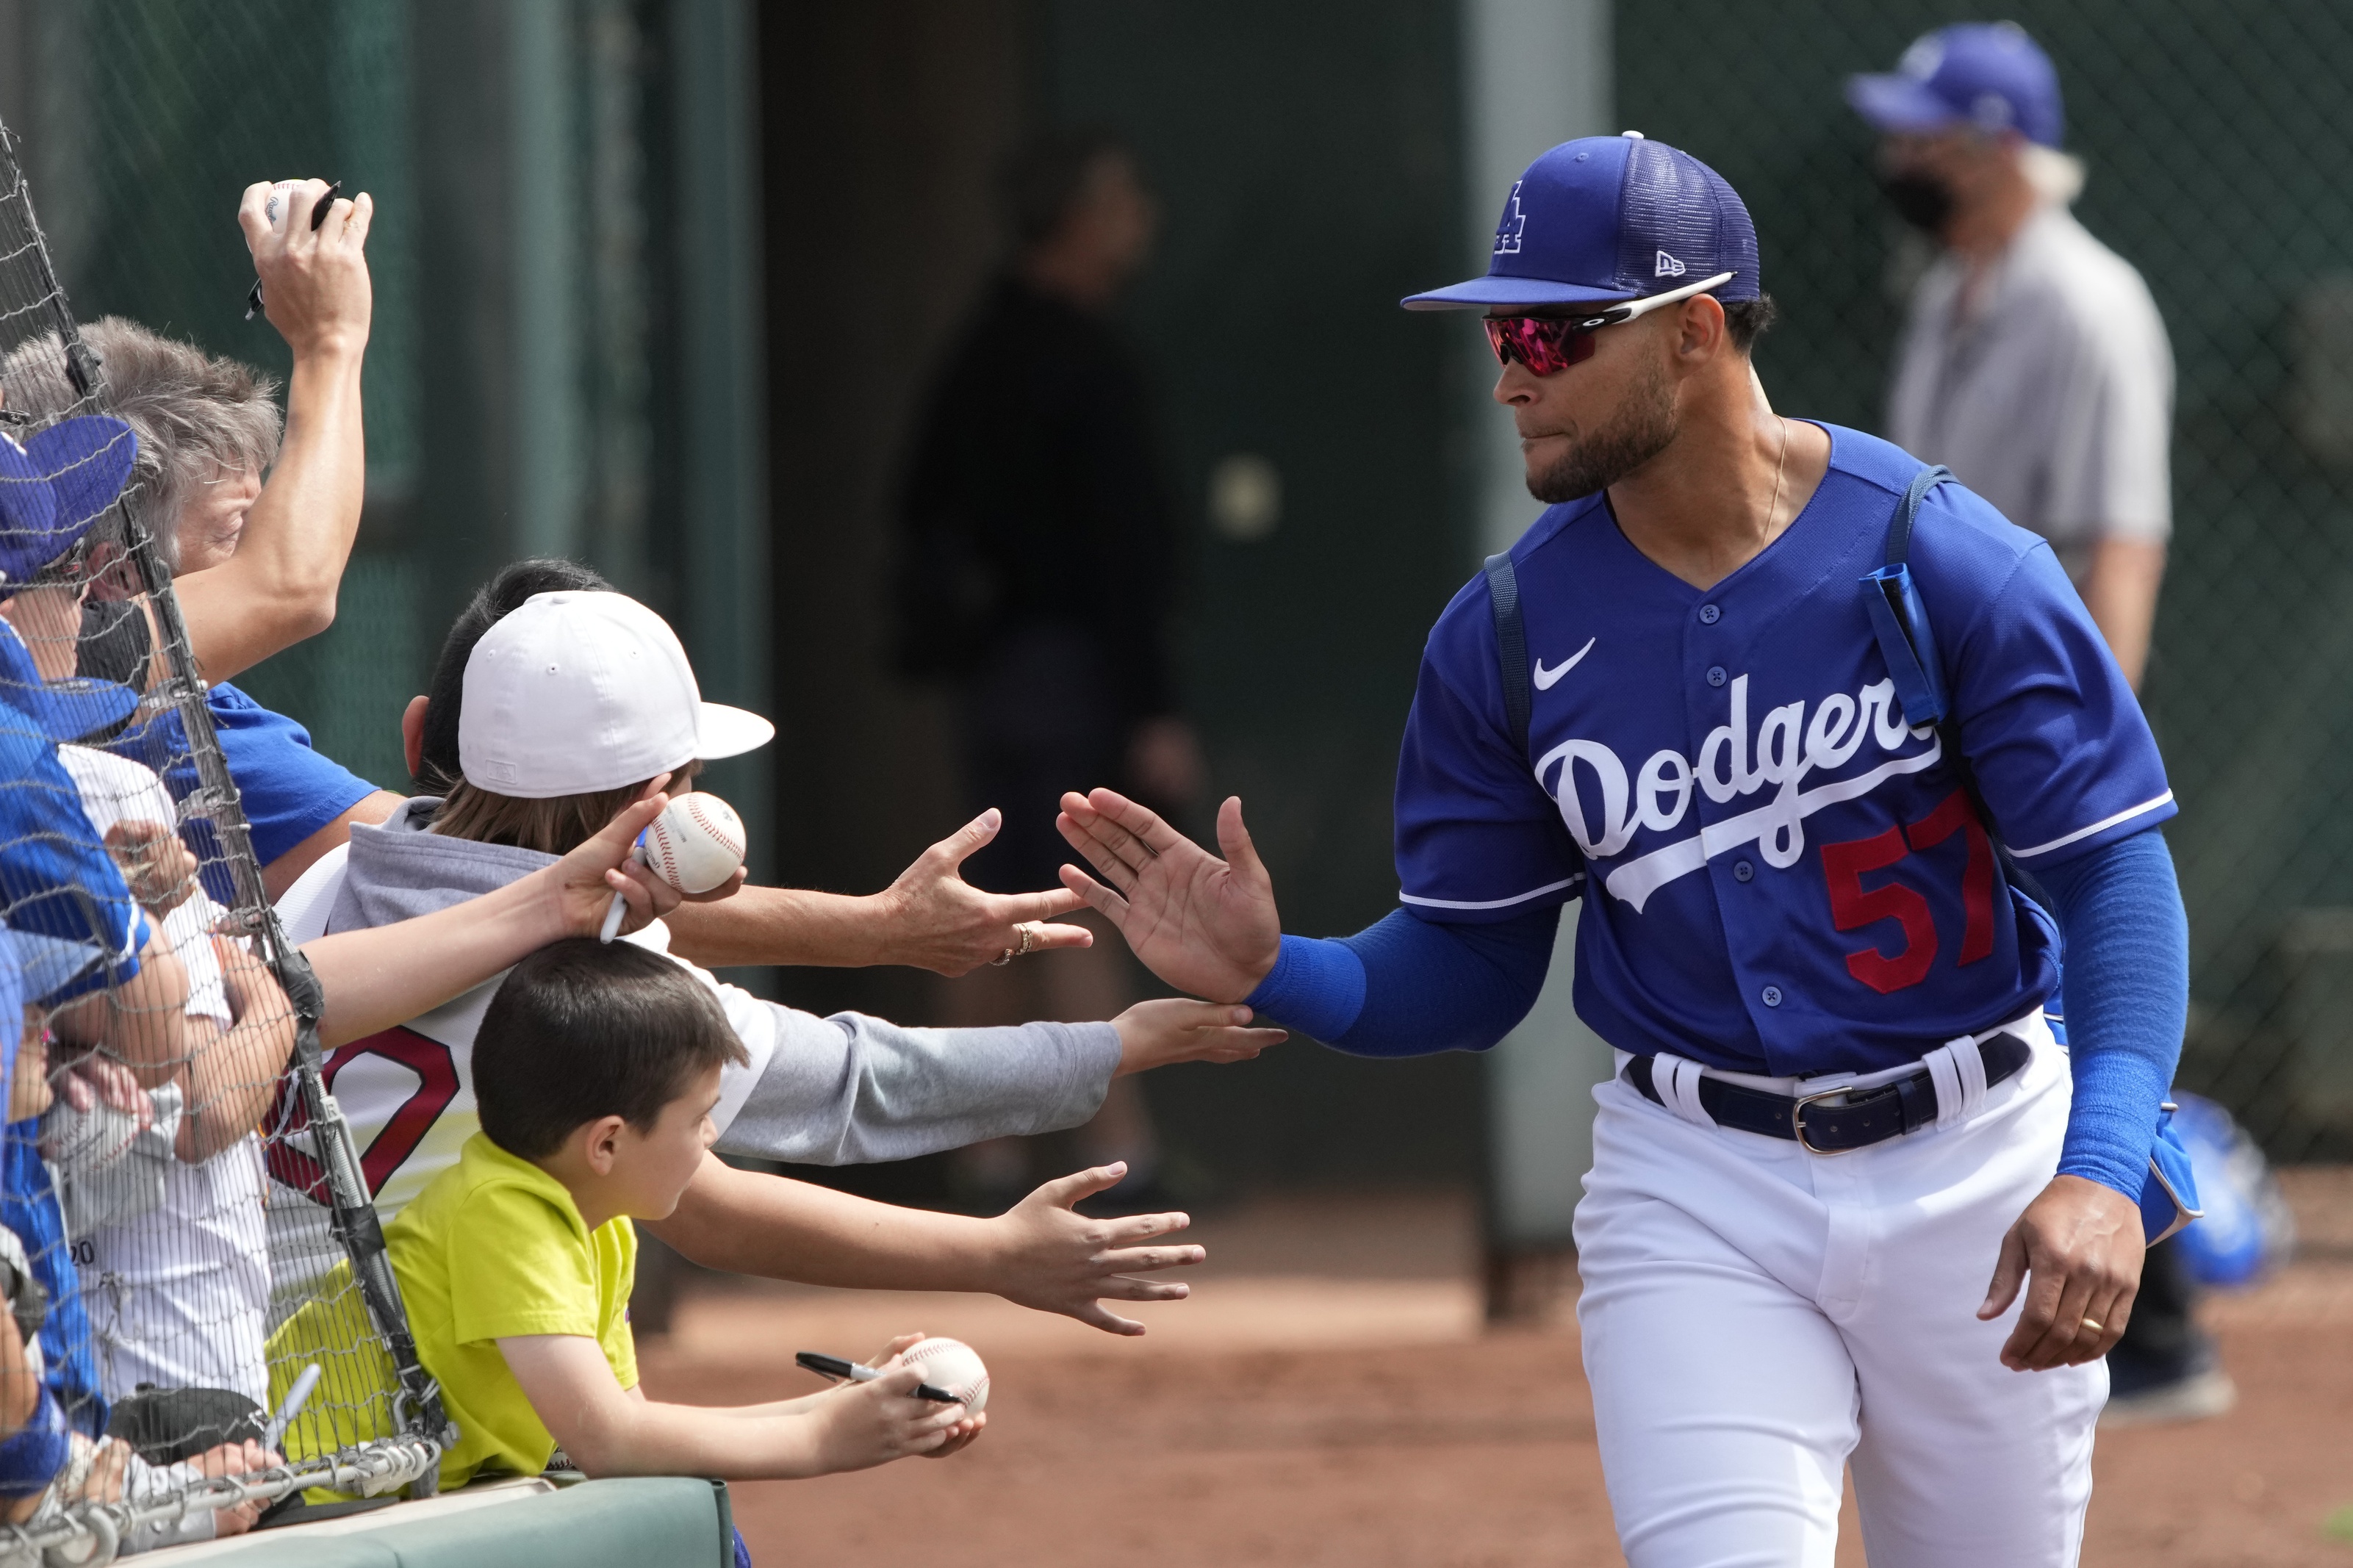 On Opening Day, the LA Dodgers Are Dominating MLB Jersey Sales - Boardroom